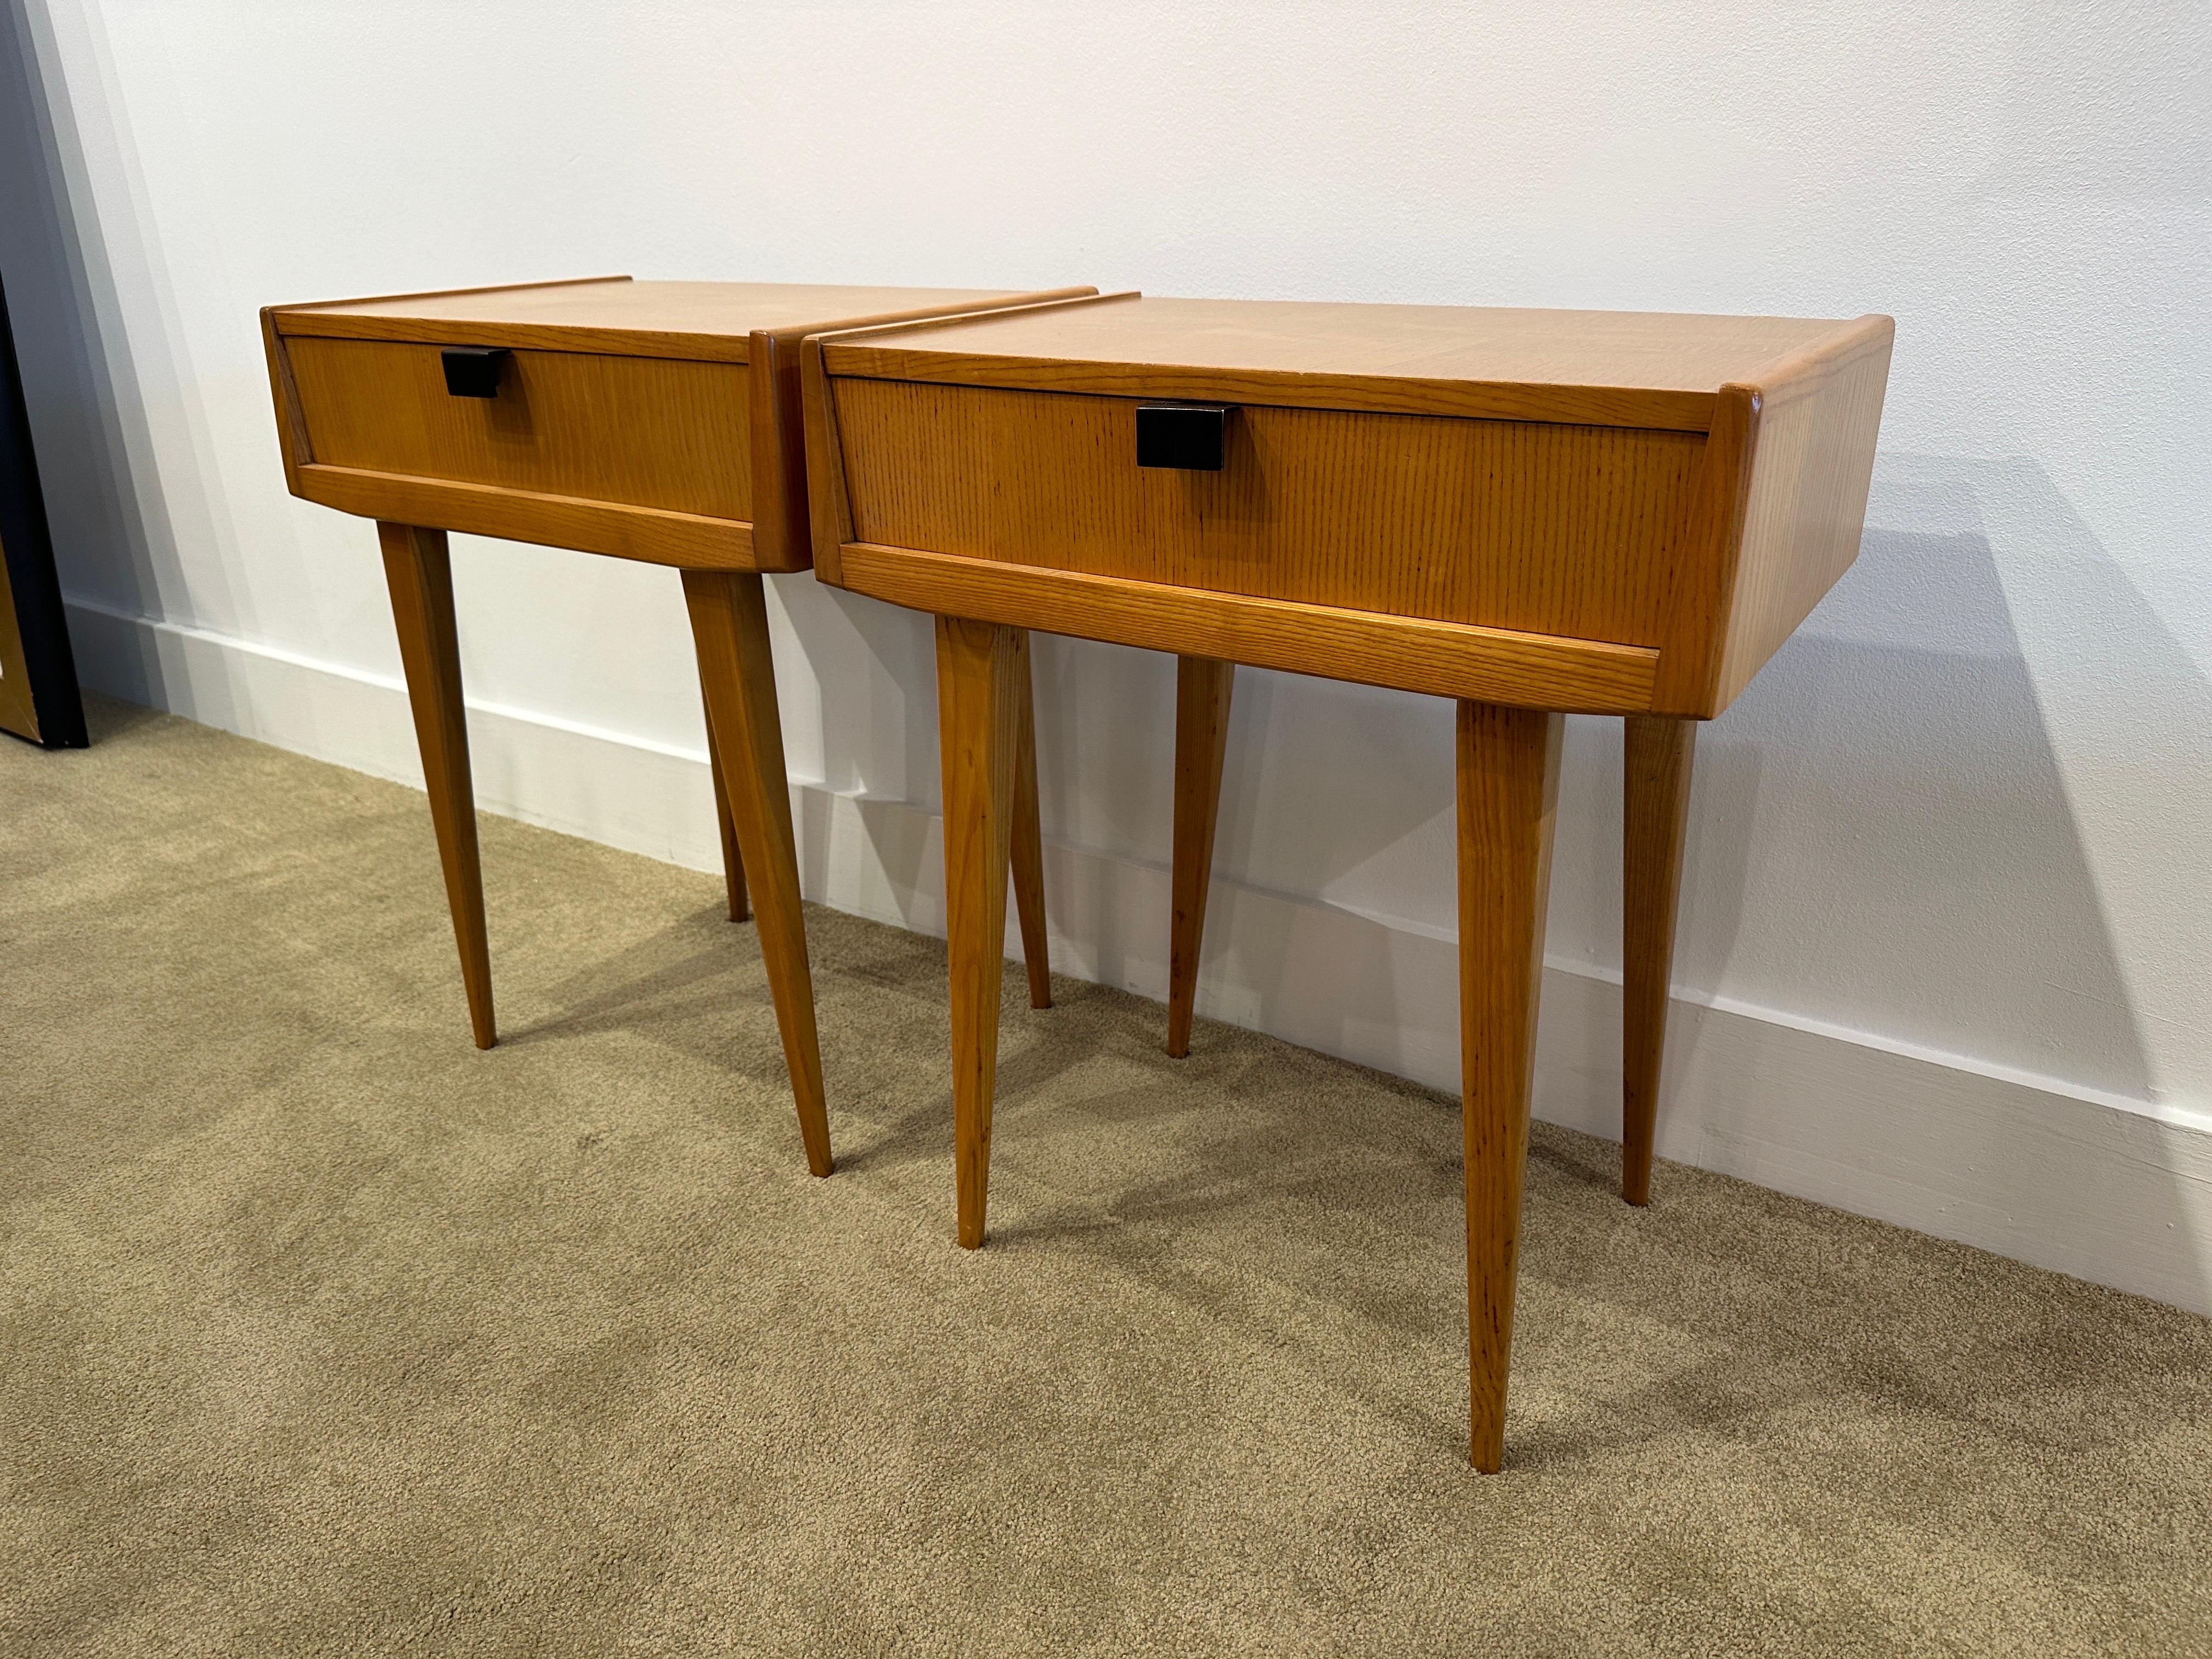 Extremely handsome pair of side tables/ nightstands with clean lines, elegant elongated legs and rich oak veneer. Original metal pulls and very sleek.  THIS ITEM IS LOCATED AND WILL SHIP FROM OUR EAST HAMPTON, NY SHOWROOM.